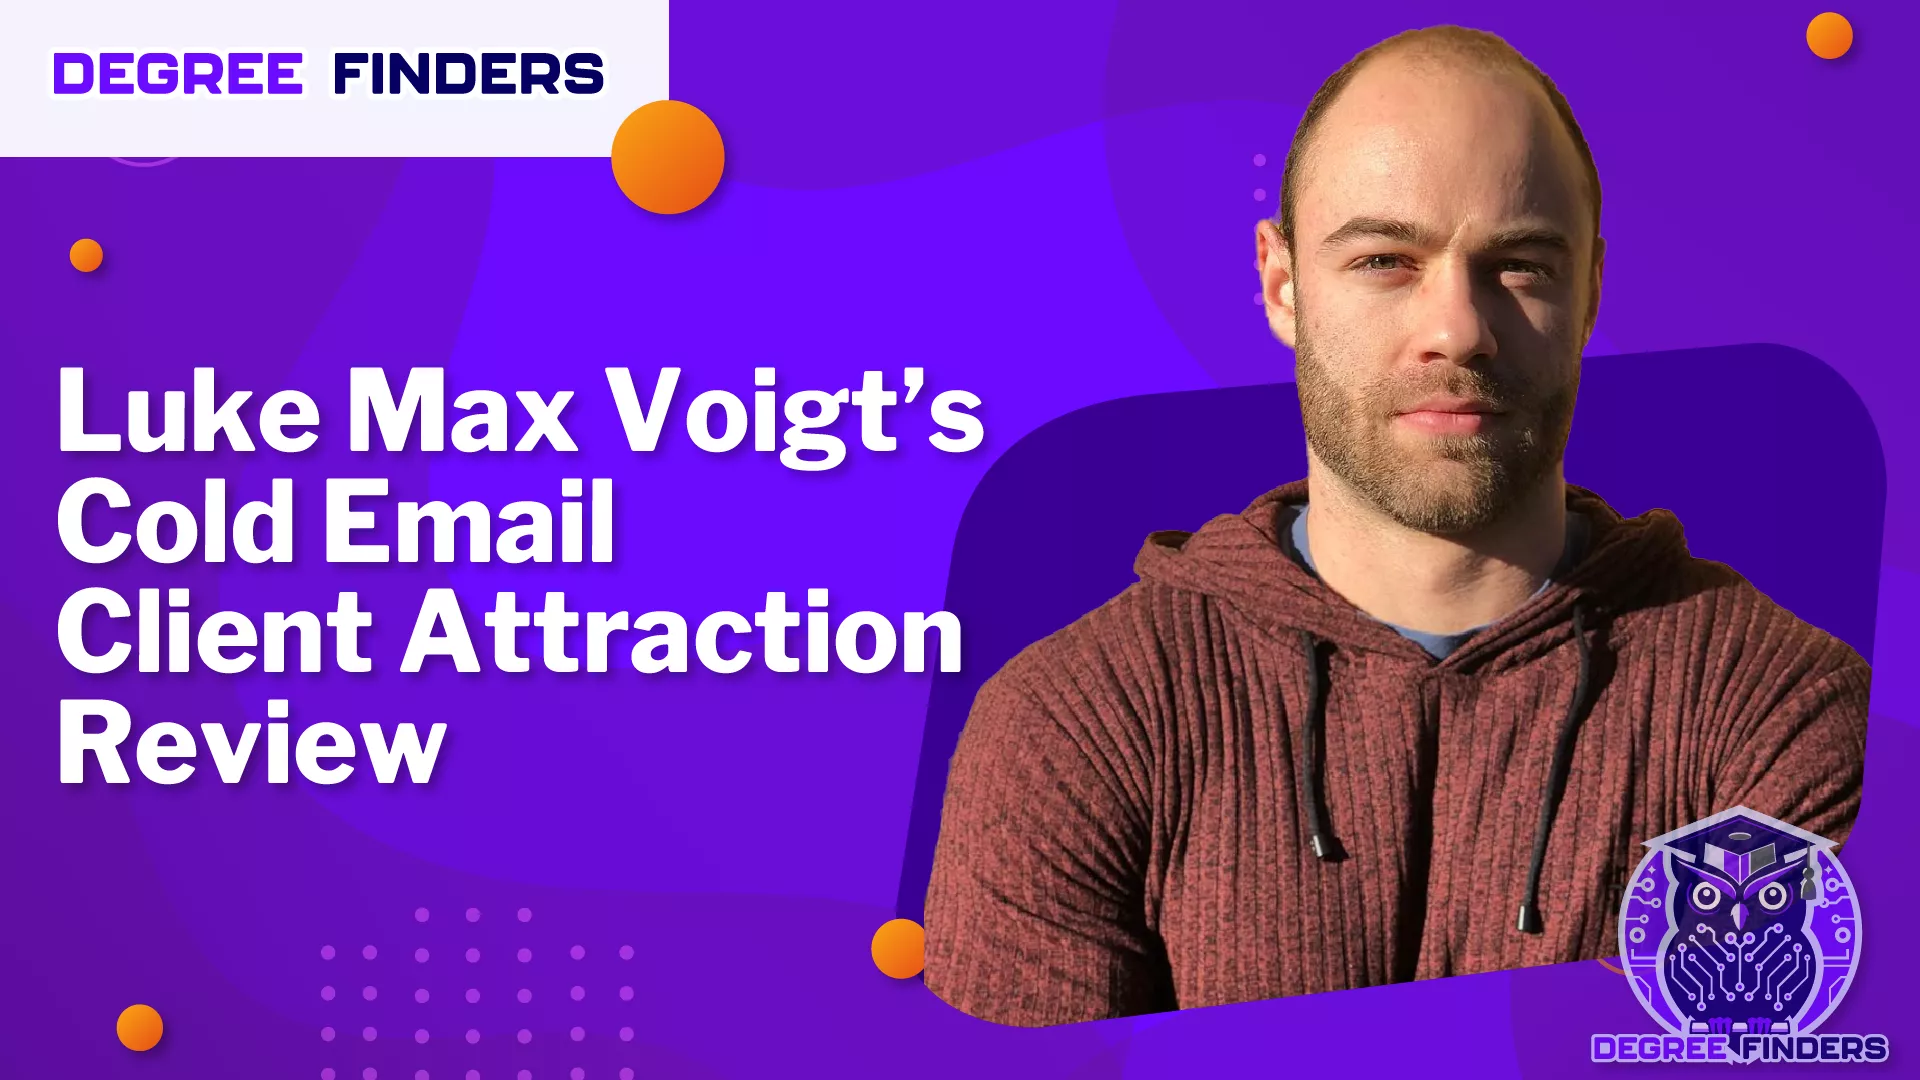 Luke Max Voigt’s Cold Email Client Attraction Review